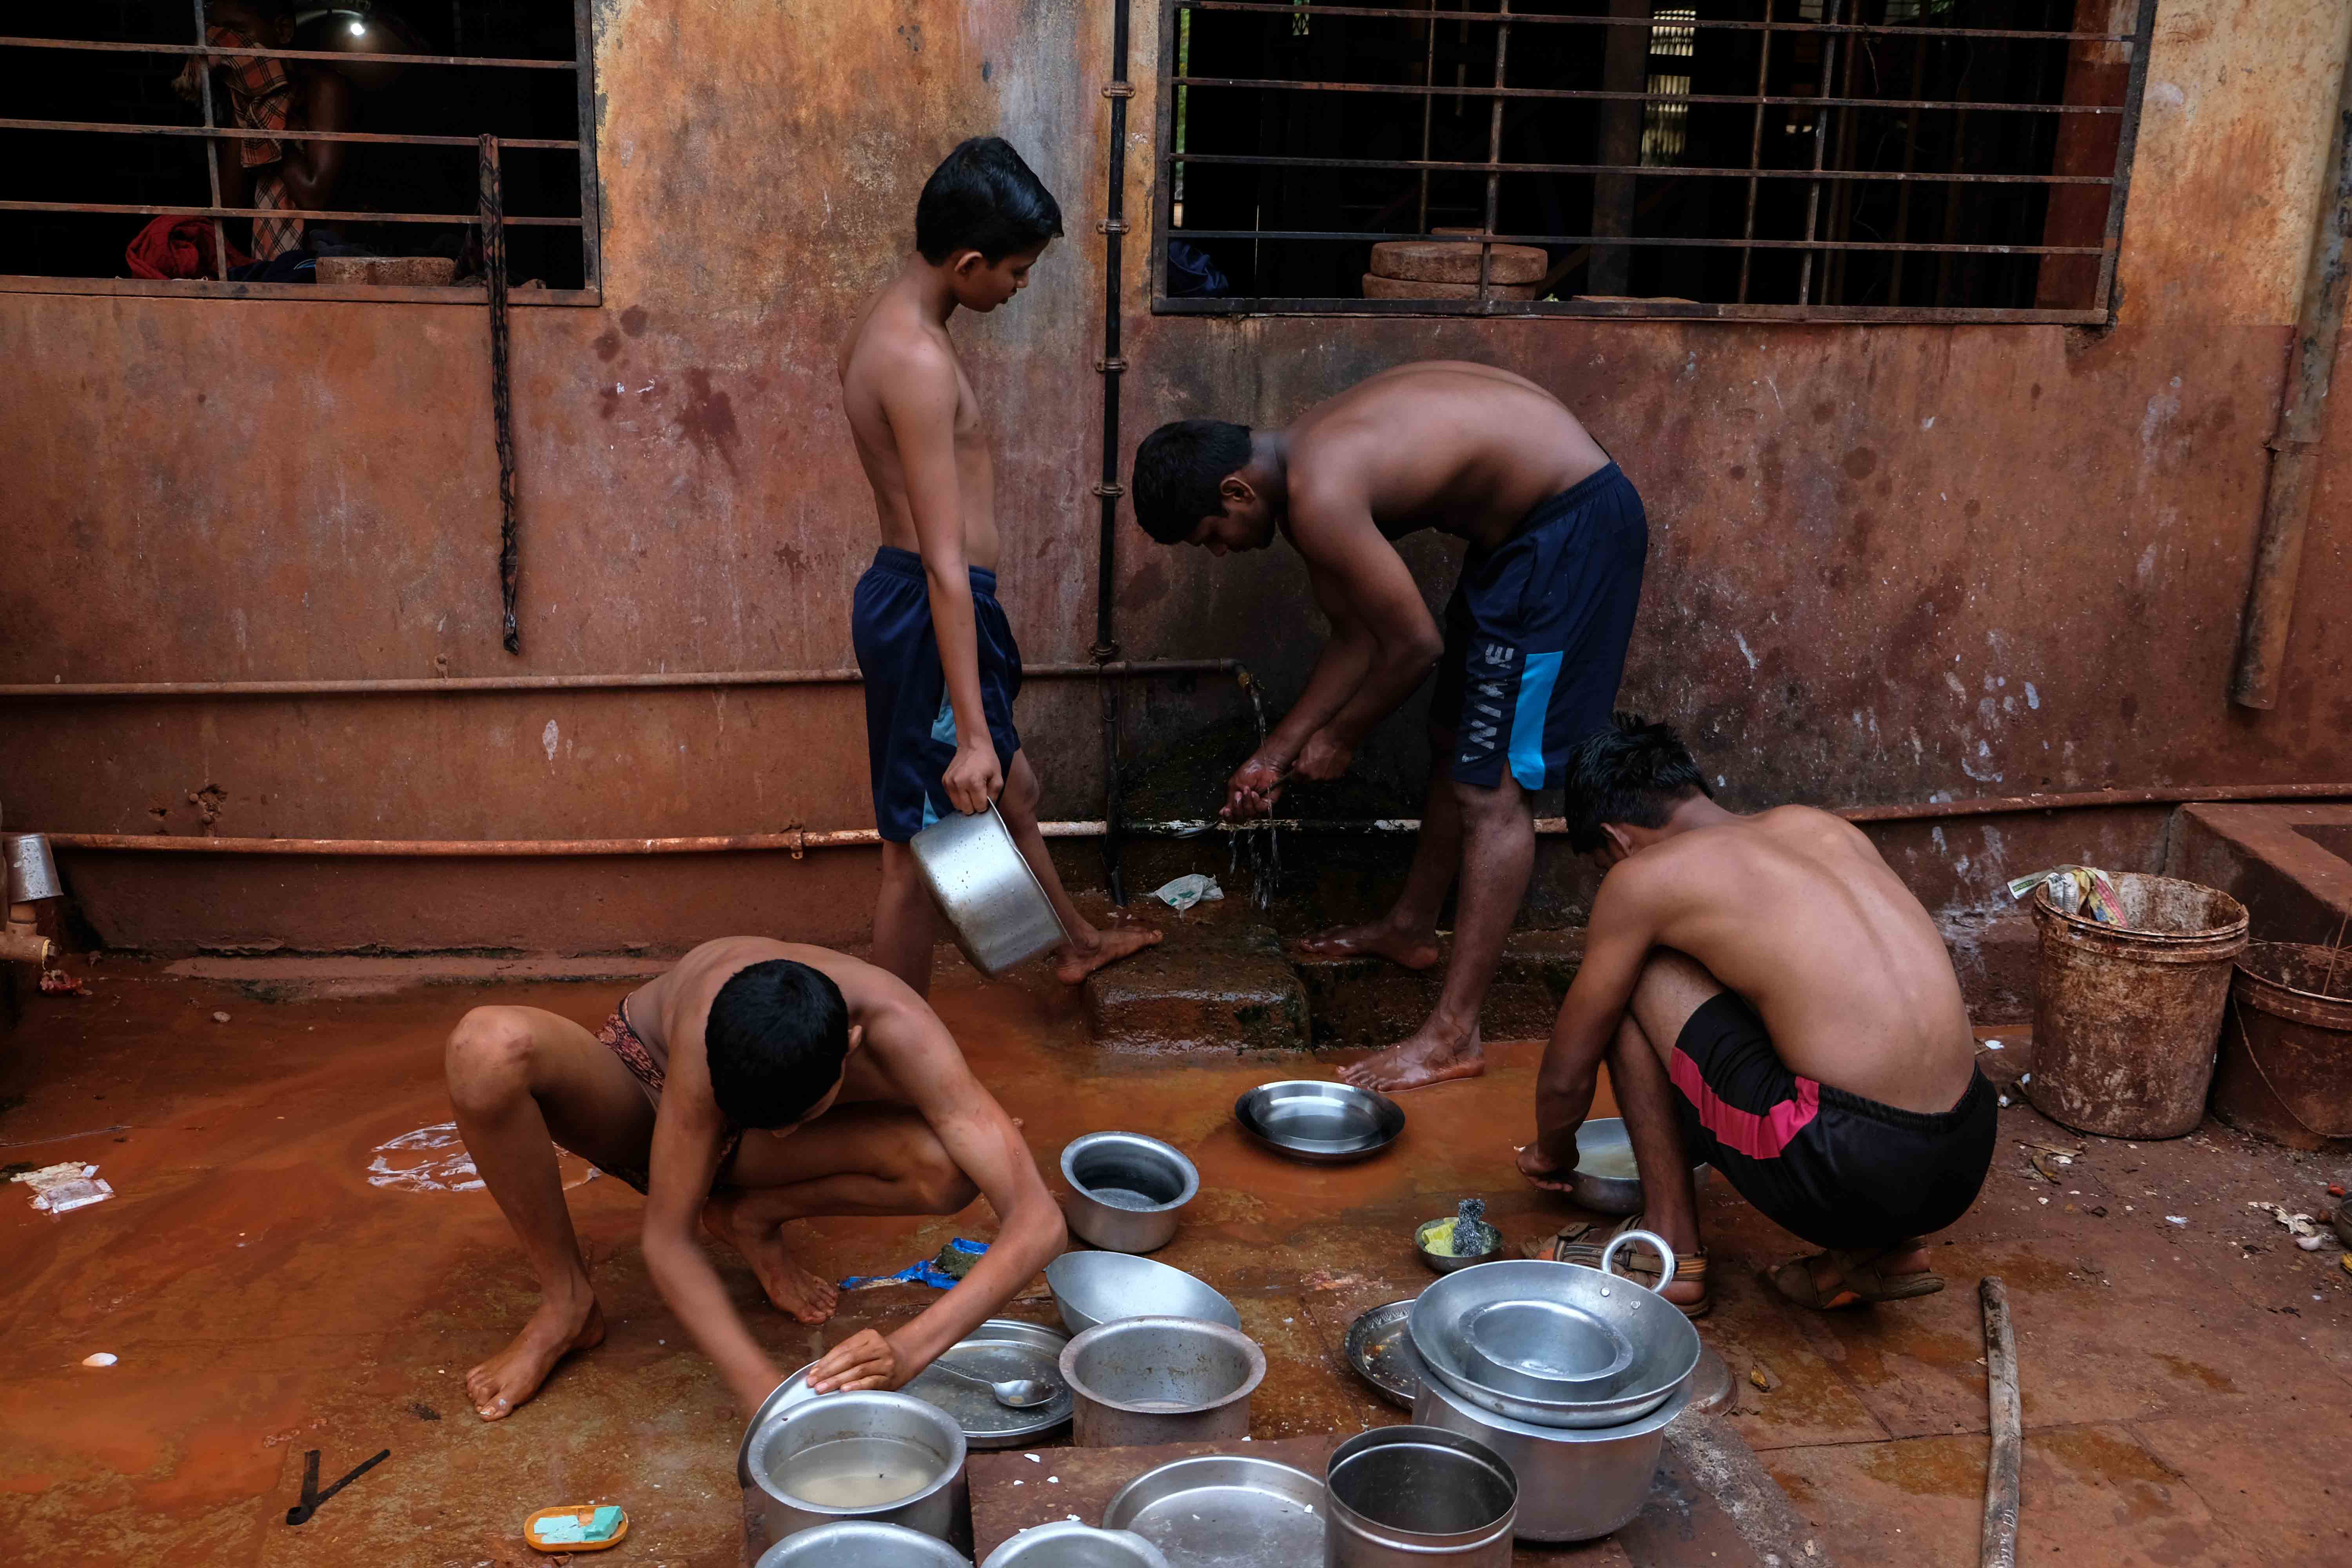  Young wrestlers washing pots in Motibag Akhara, Kolhapur. Every trainee wrestler is expected to complete their own chores and help each other out in maintaining cleanliness and discipline in the akhara. This involves helping in cleaning the place, preparing the arena, washing utensils, cooking food, and a range of other daily tasks. Photograph by Indrajit Khambe ©Sahapedia